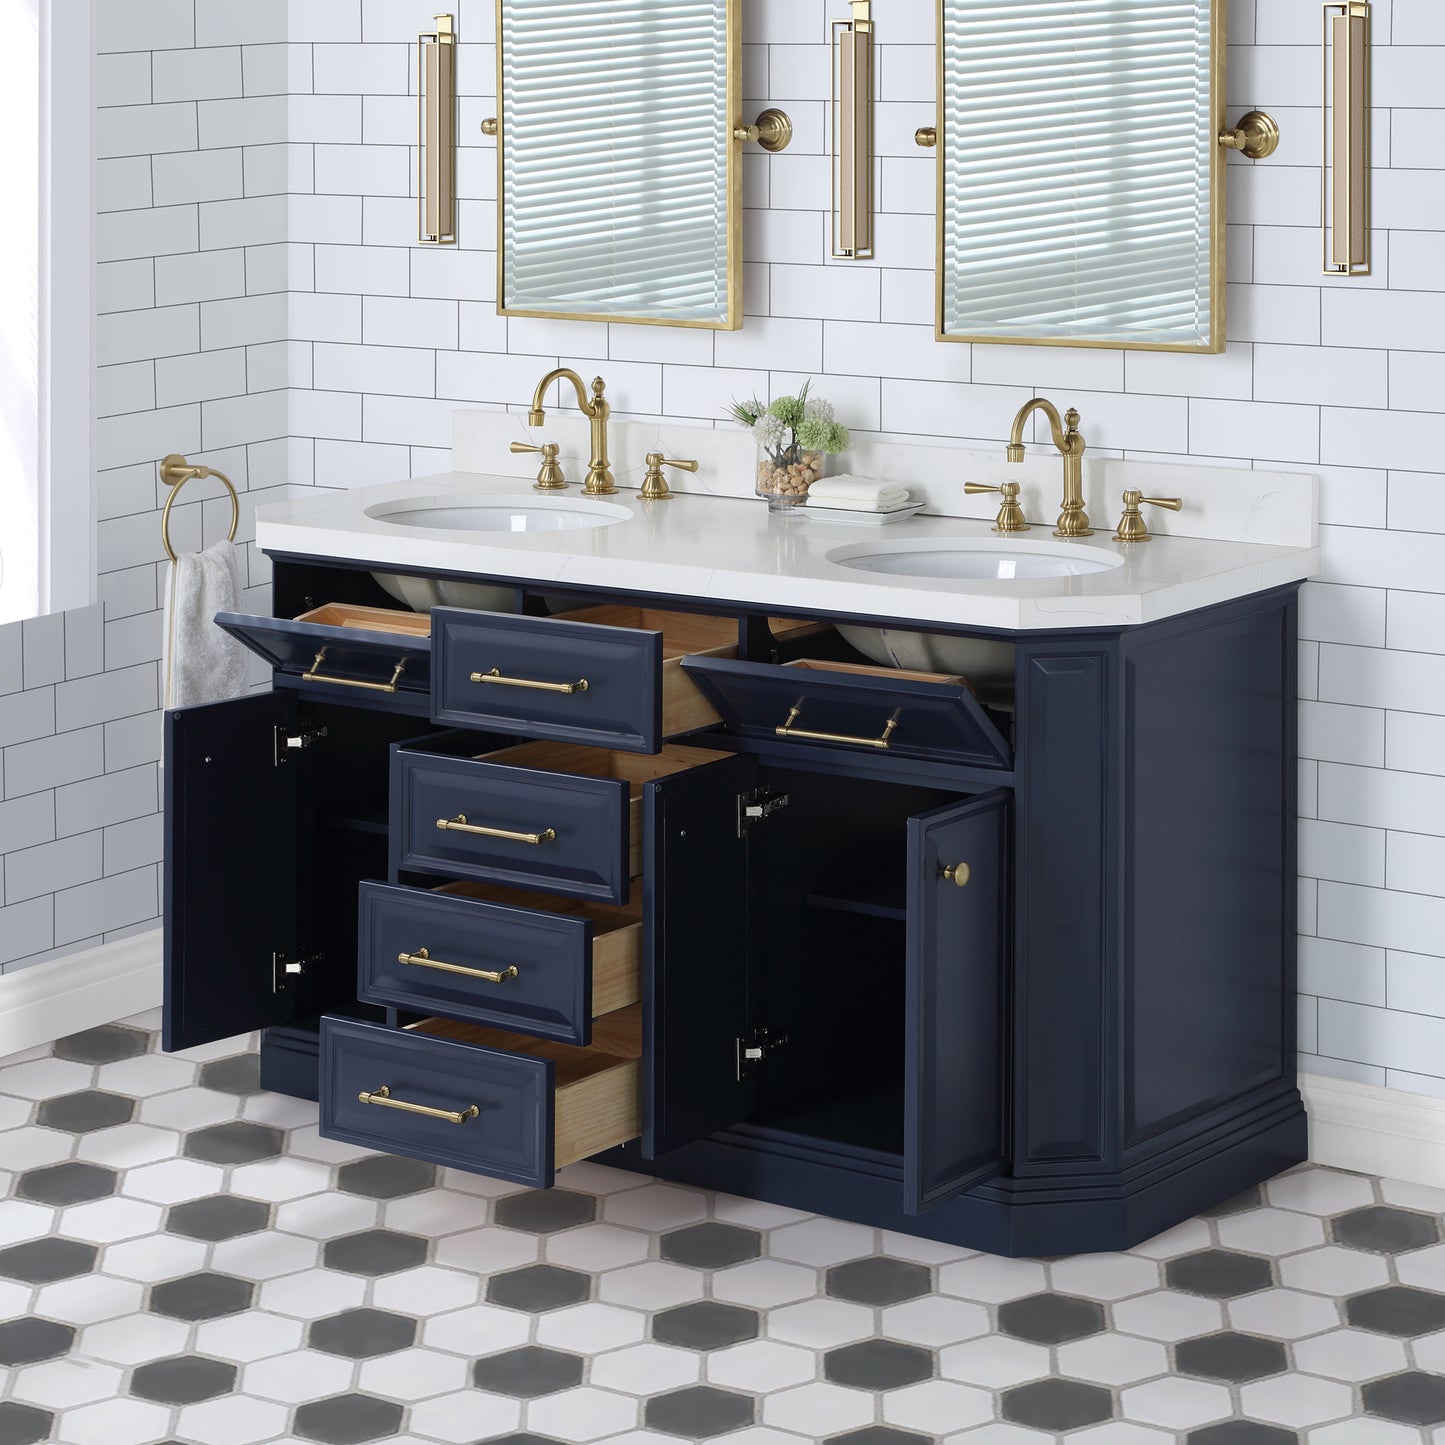 Water Creation Palace 60" Inch Double Sink White Quartz Countertop Vanity in Monarch Blue with Hook Faucets and Mirrors - Luxe Bathroom Vanities